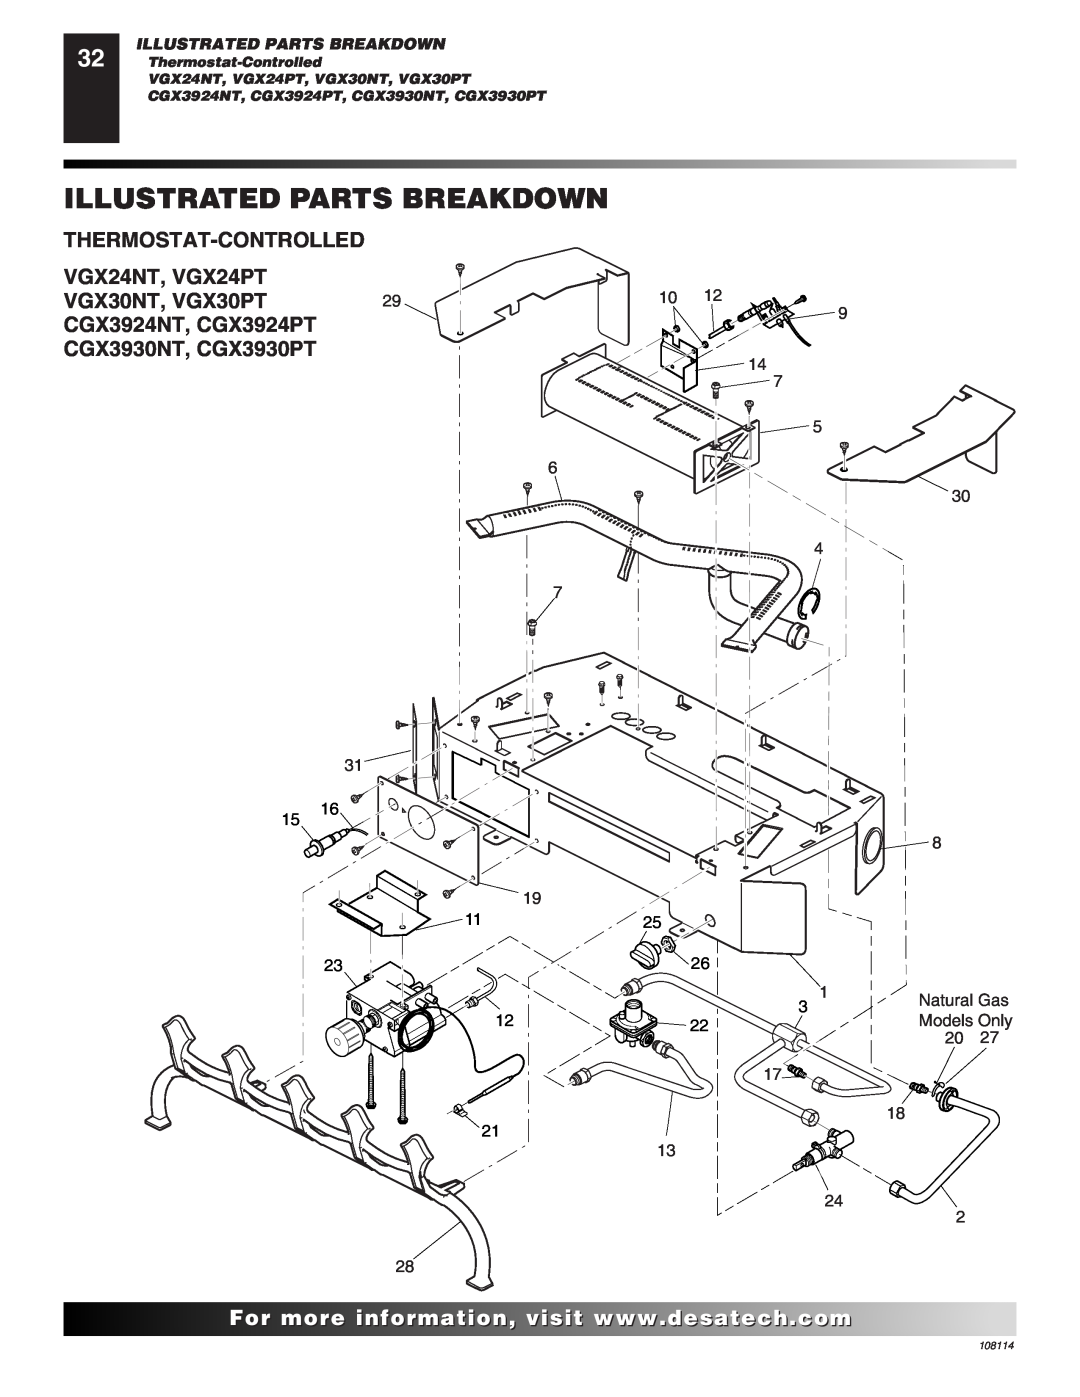 Desa INTERNATIONAL UNVENTED (VENT-FREE) GAS LOG HEATER Illustrated Parts Breakdown, Thermostat-Controlled, 108114 